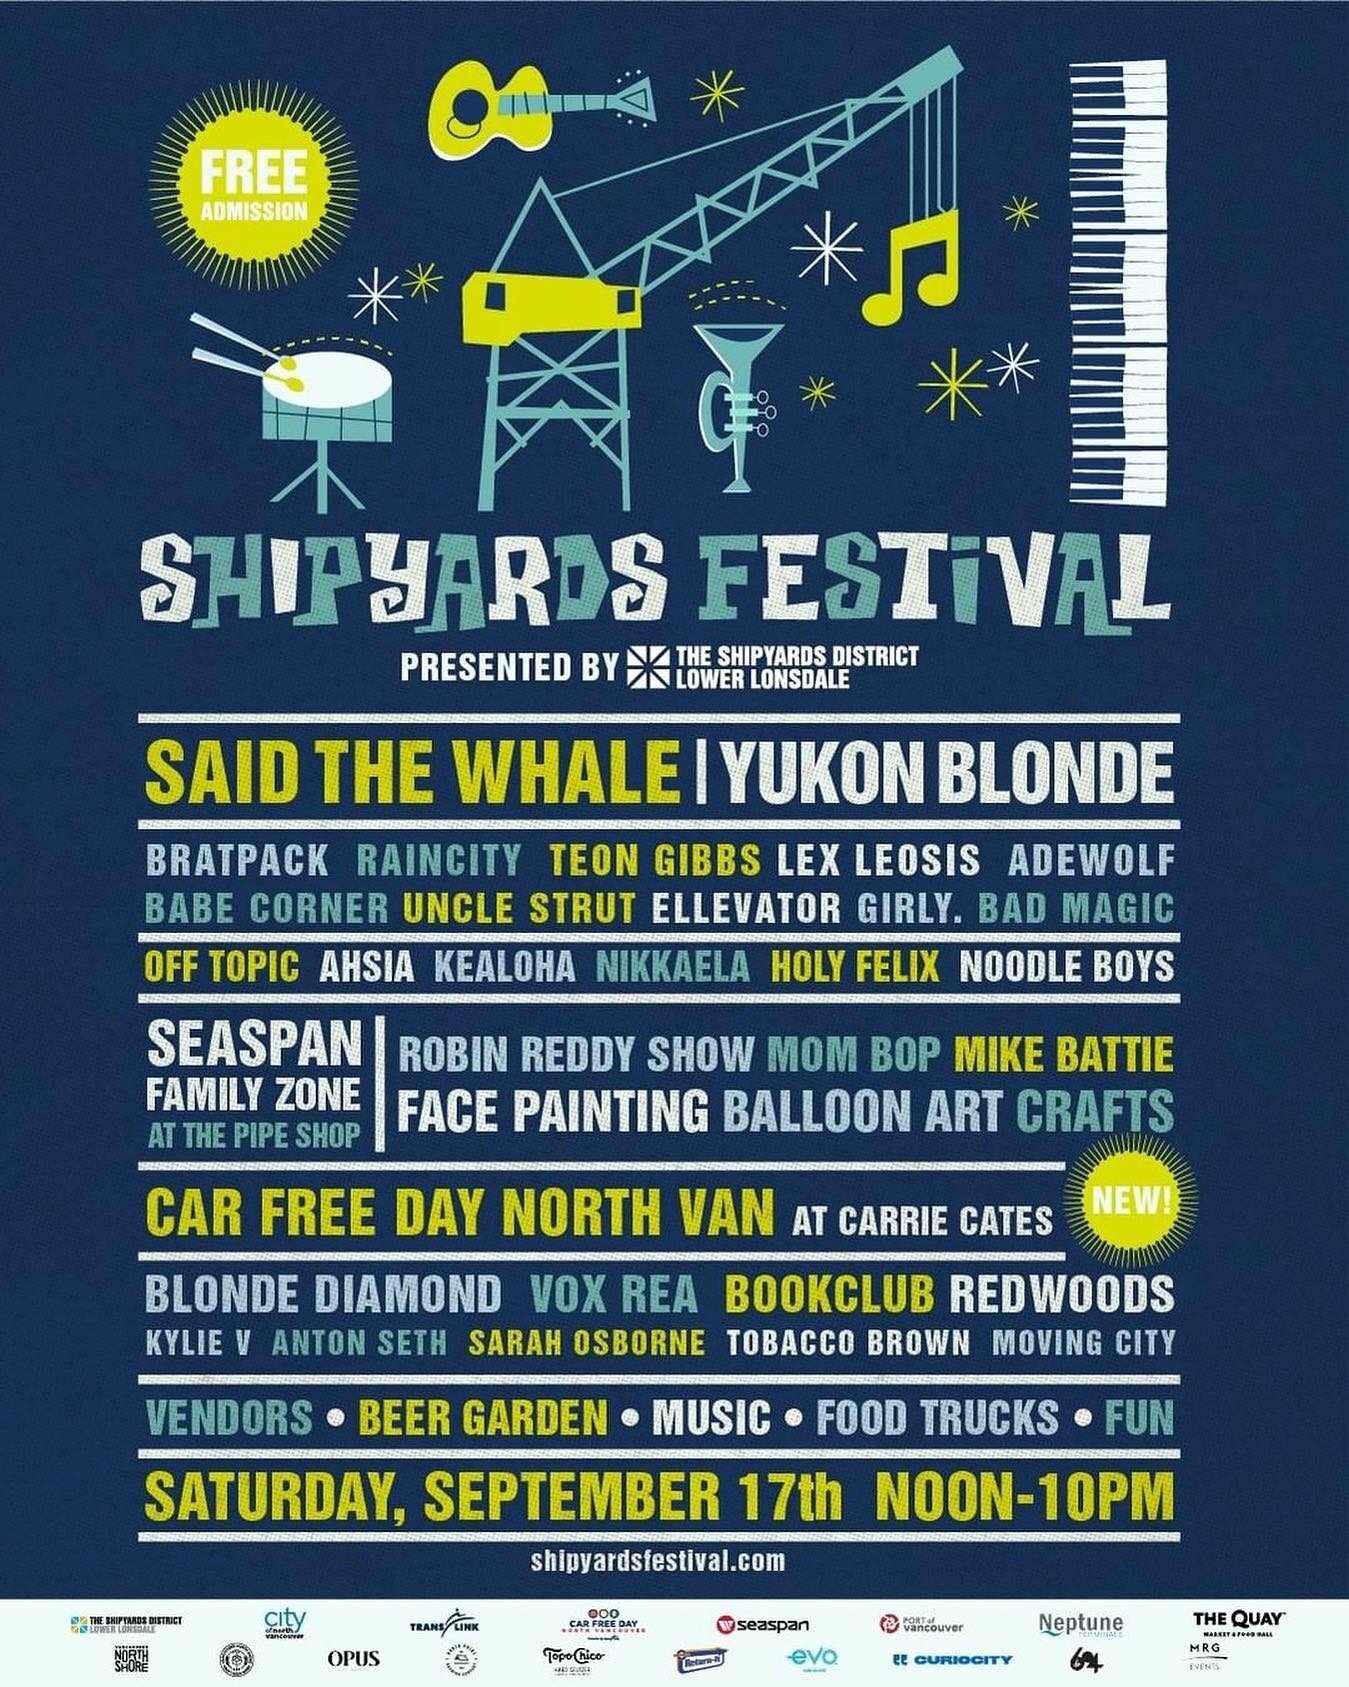 #Vancouver Shipyards Festival in North Van&rsquo;s @shipyardsdistrict happening now! @ellevatorband hit the stage next. FREE! + the rest of the lineup looking 👌👌👌